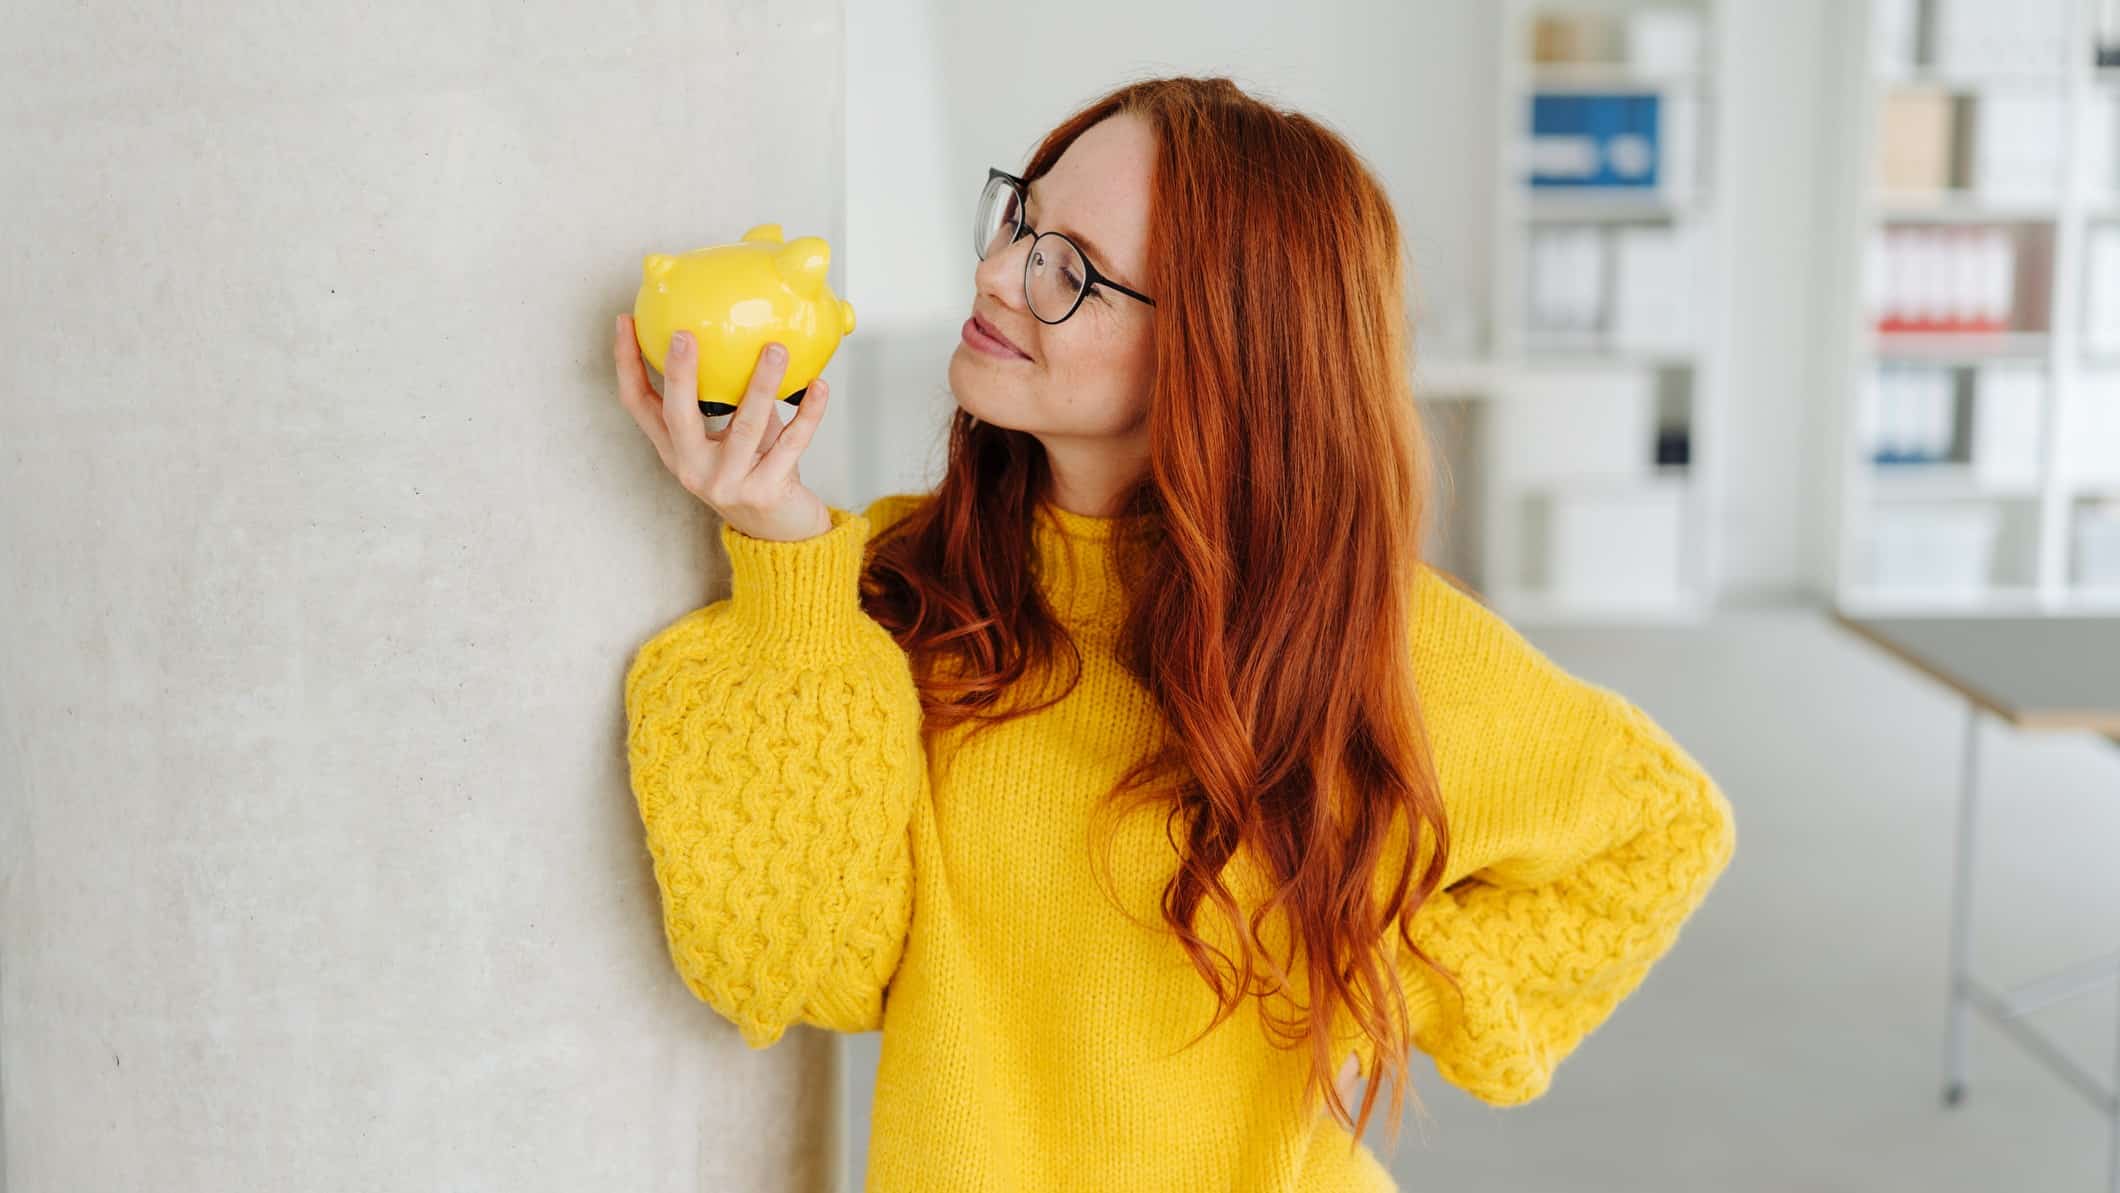 A woman in a bright yellow jumper looks happily at her yellow piggy bank.